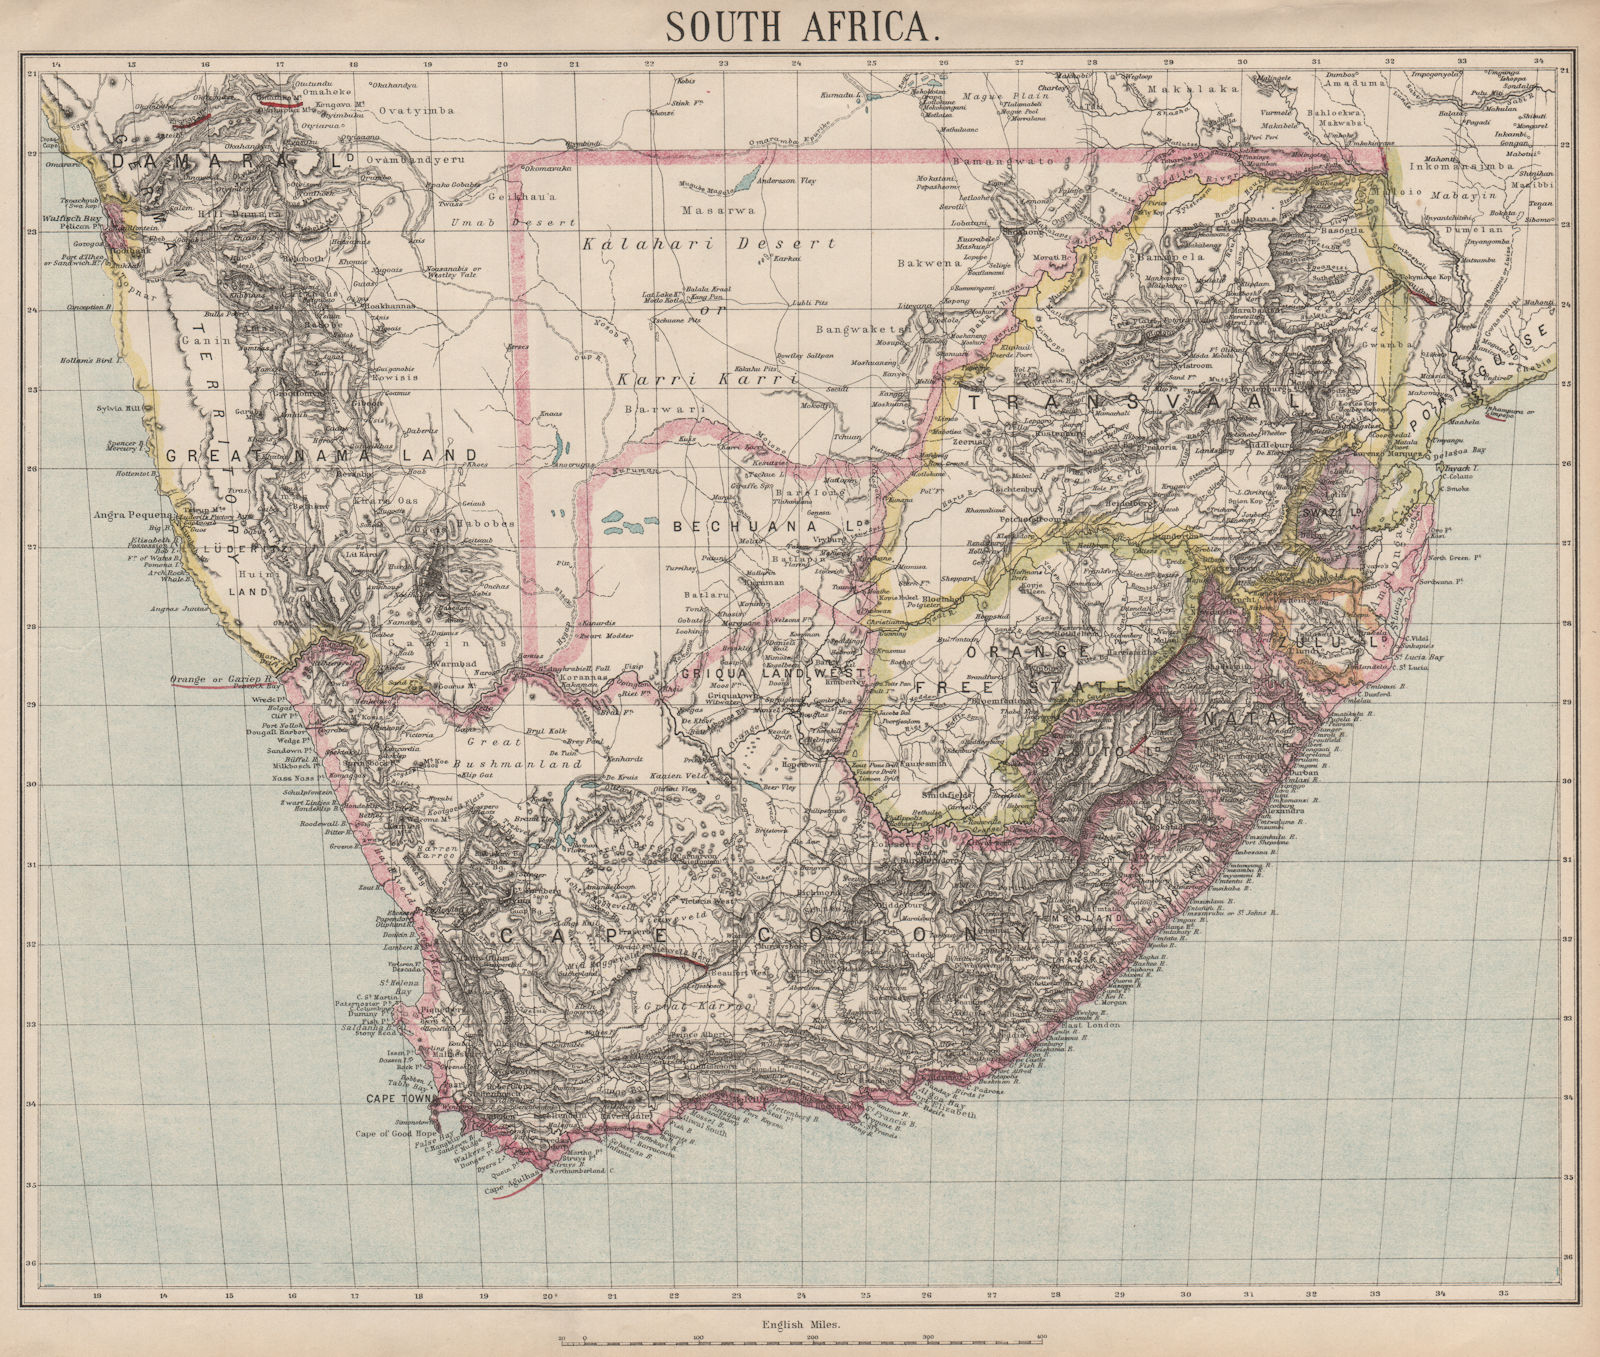 SOUTH AFRICA. Cape Colony Orange Free State Transvaal Nama Land. LETTS 1889 map